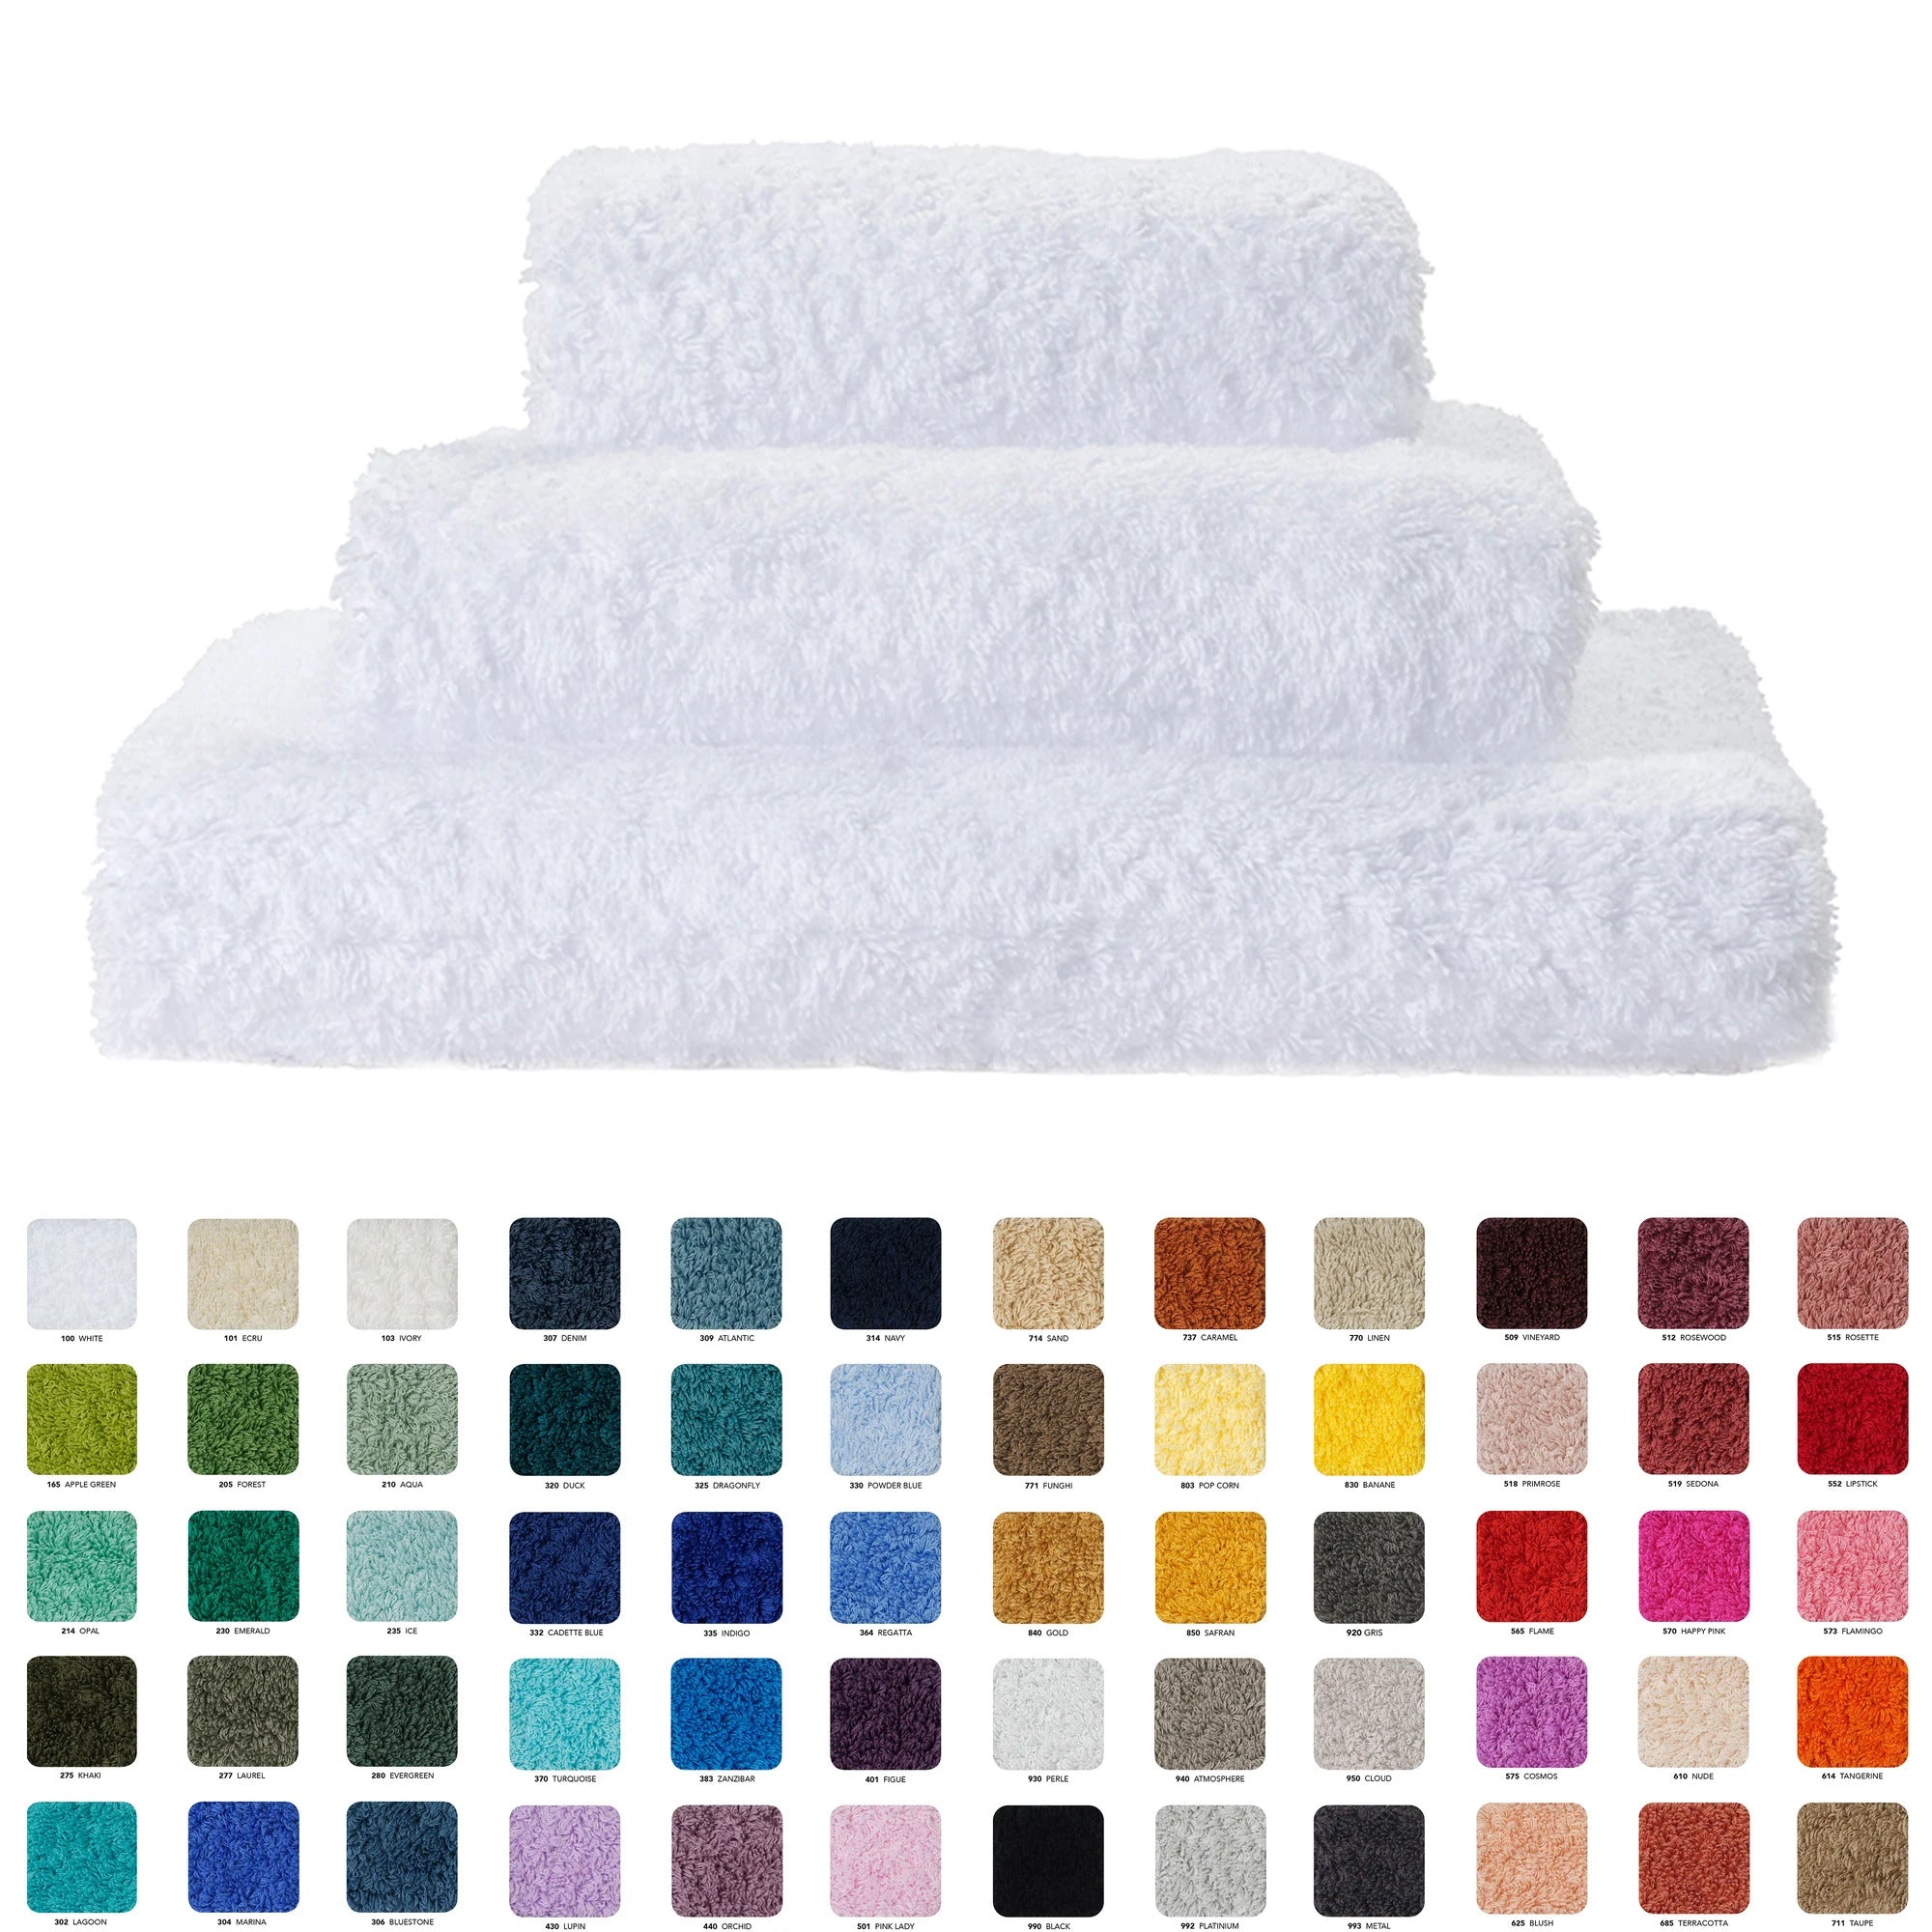 Abyss Super Piles towels are available in 60 colors